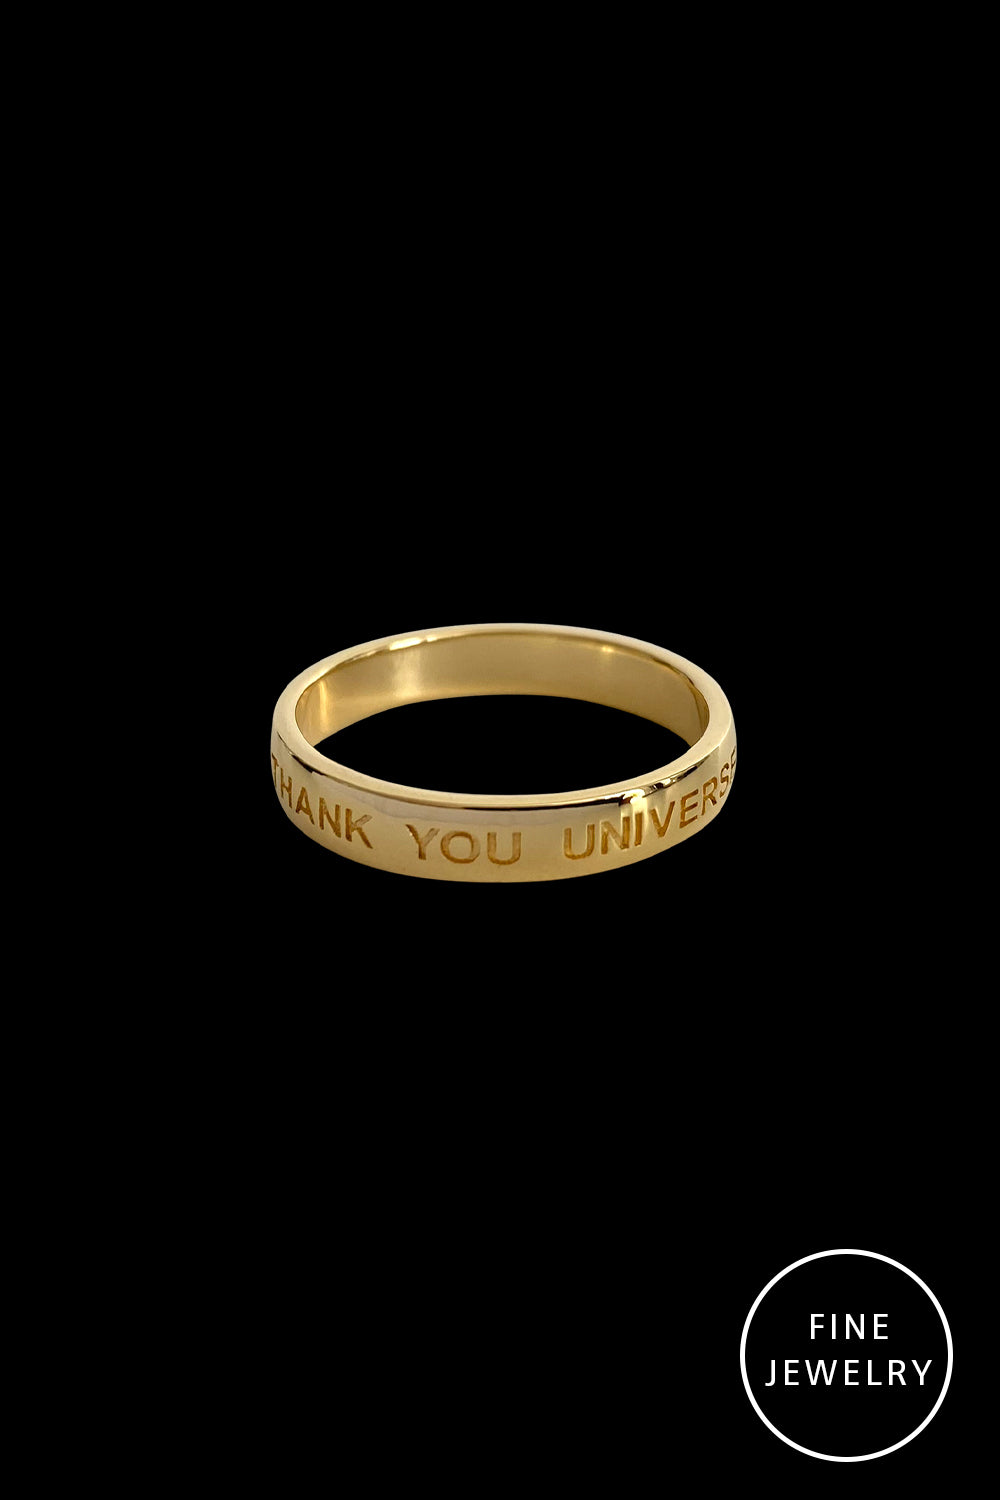 FINE JEWELRY - THANK YOU UNIVERSE SIMPLE - Gold Ring